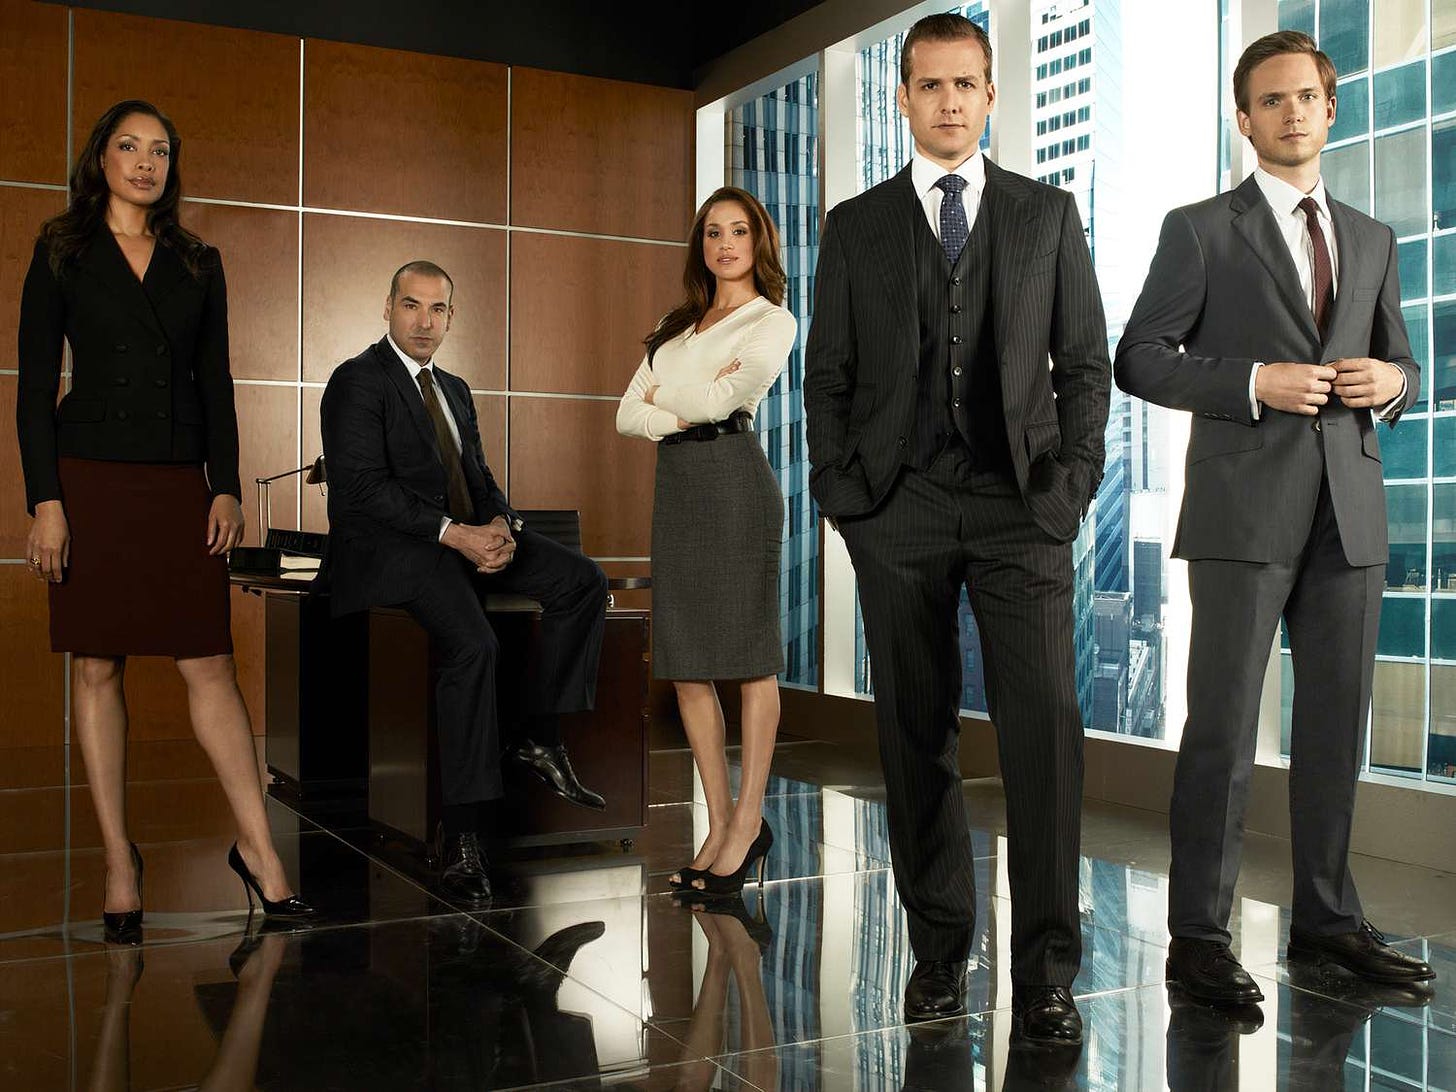 The Cast of 'Suits': Where Are They Now?